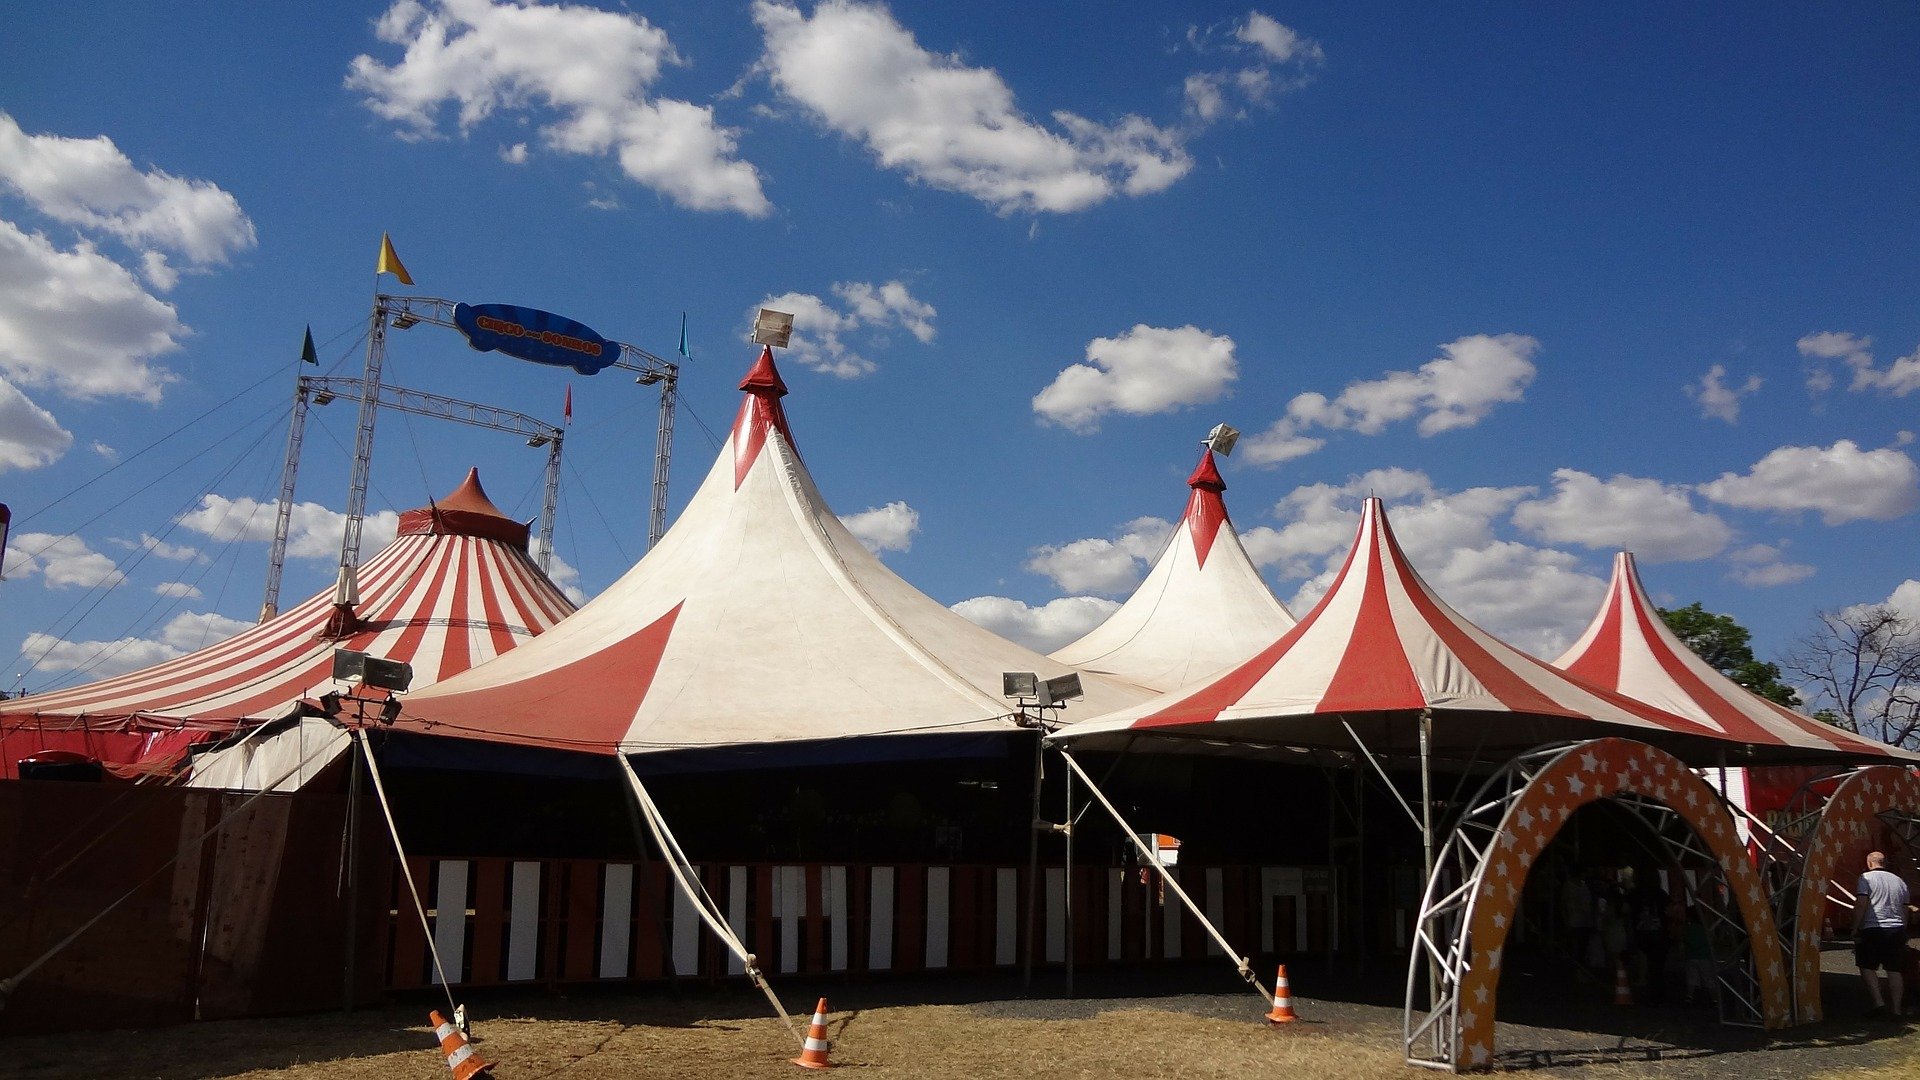 A big red-and-white circus tent pitched in an open area | Photo: Pixabay/Claudio Kirner